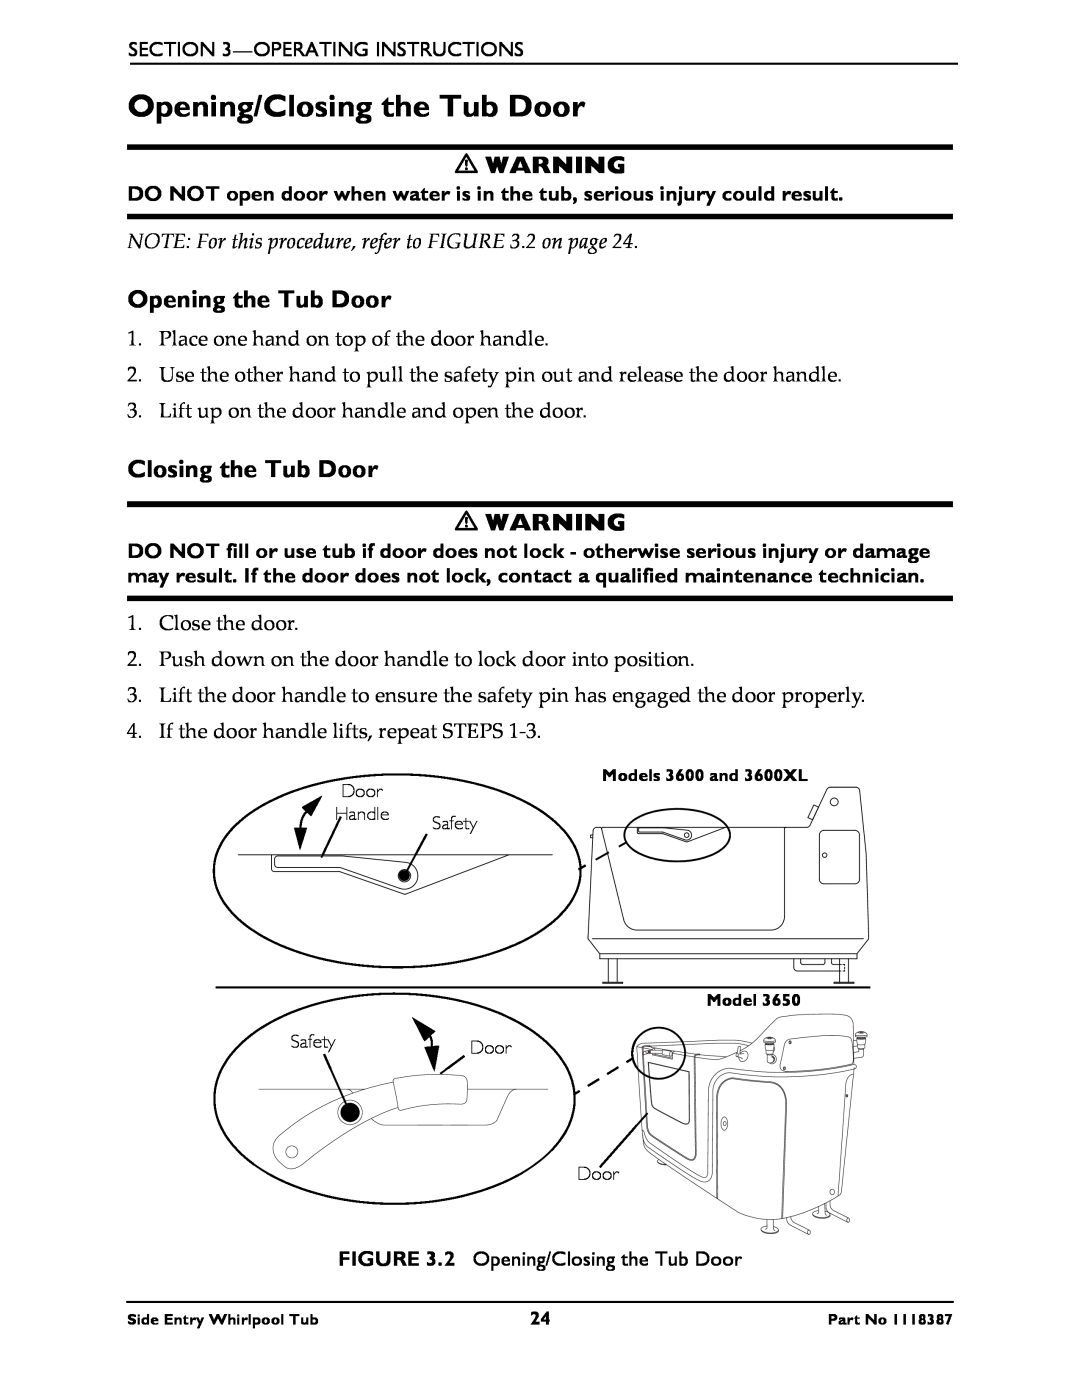 Invacare 3650 manual Opening/Closing the Tub Door, Opening the Tub Door, NOTE For this procedure, refer to .2 on page 